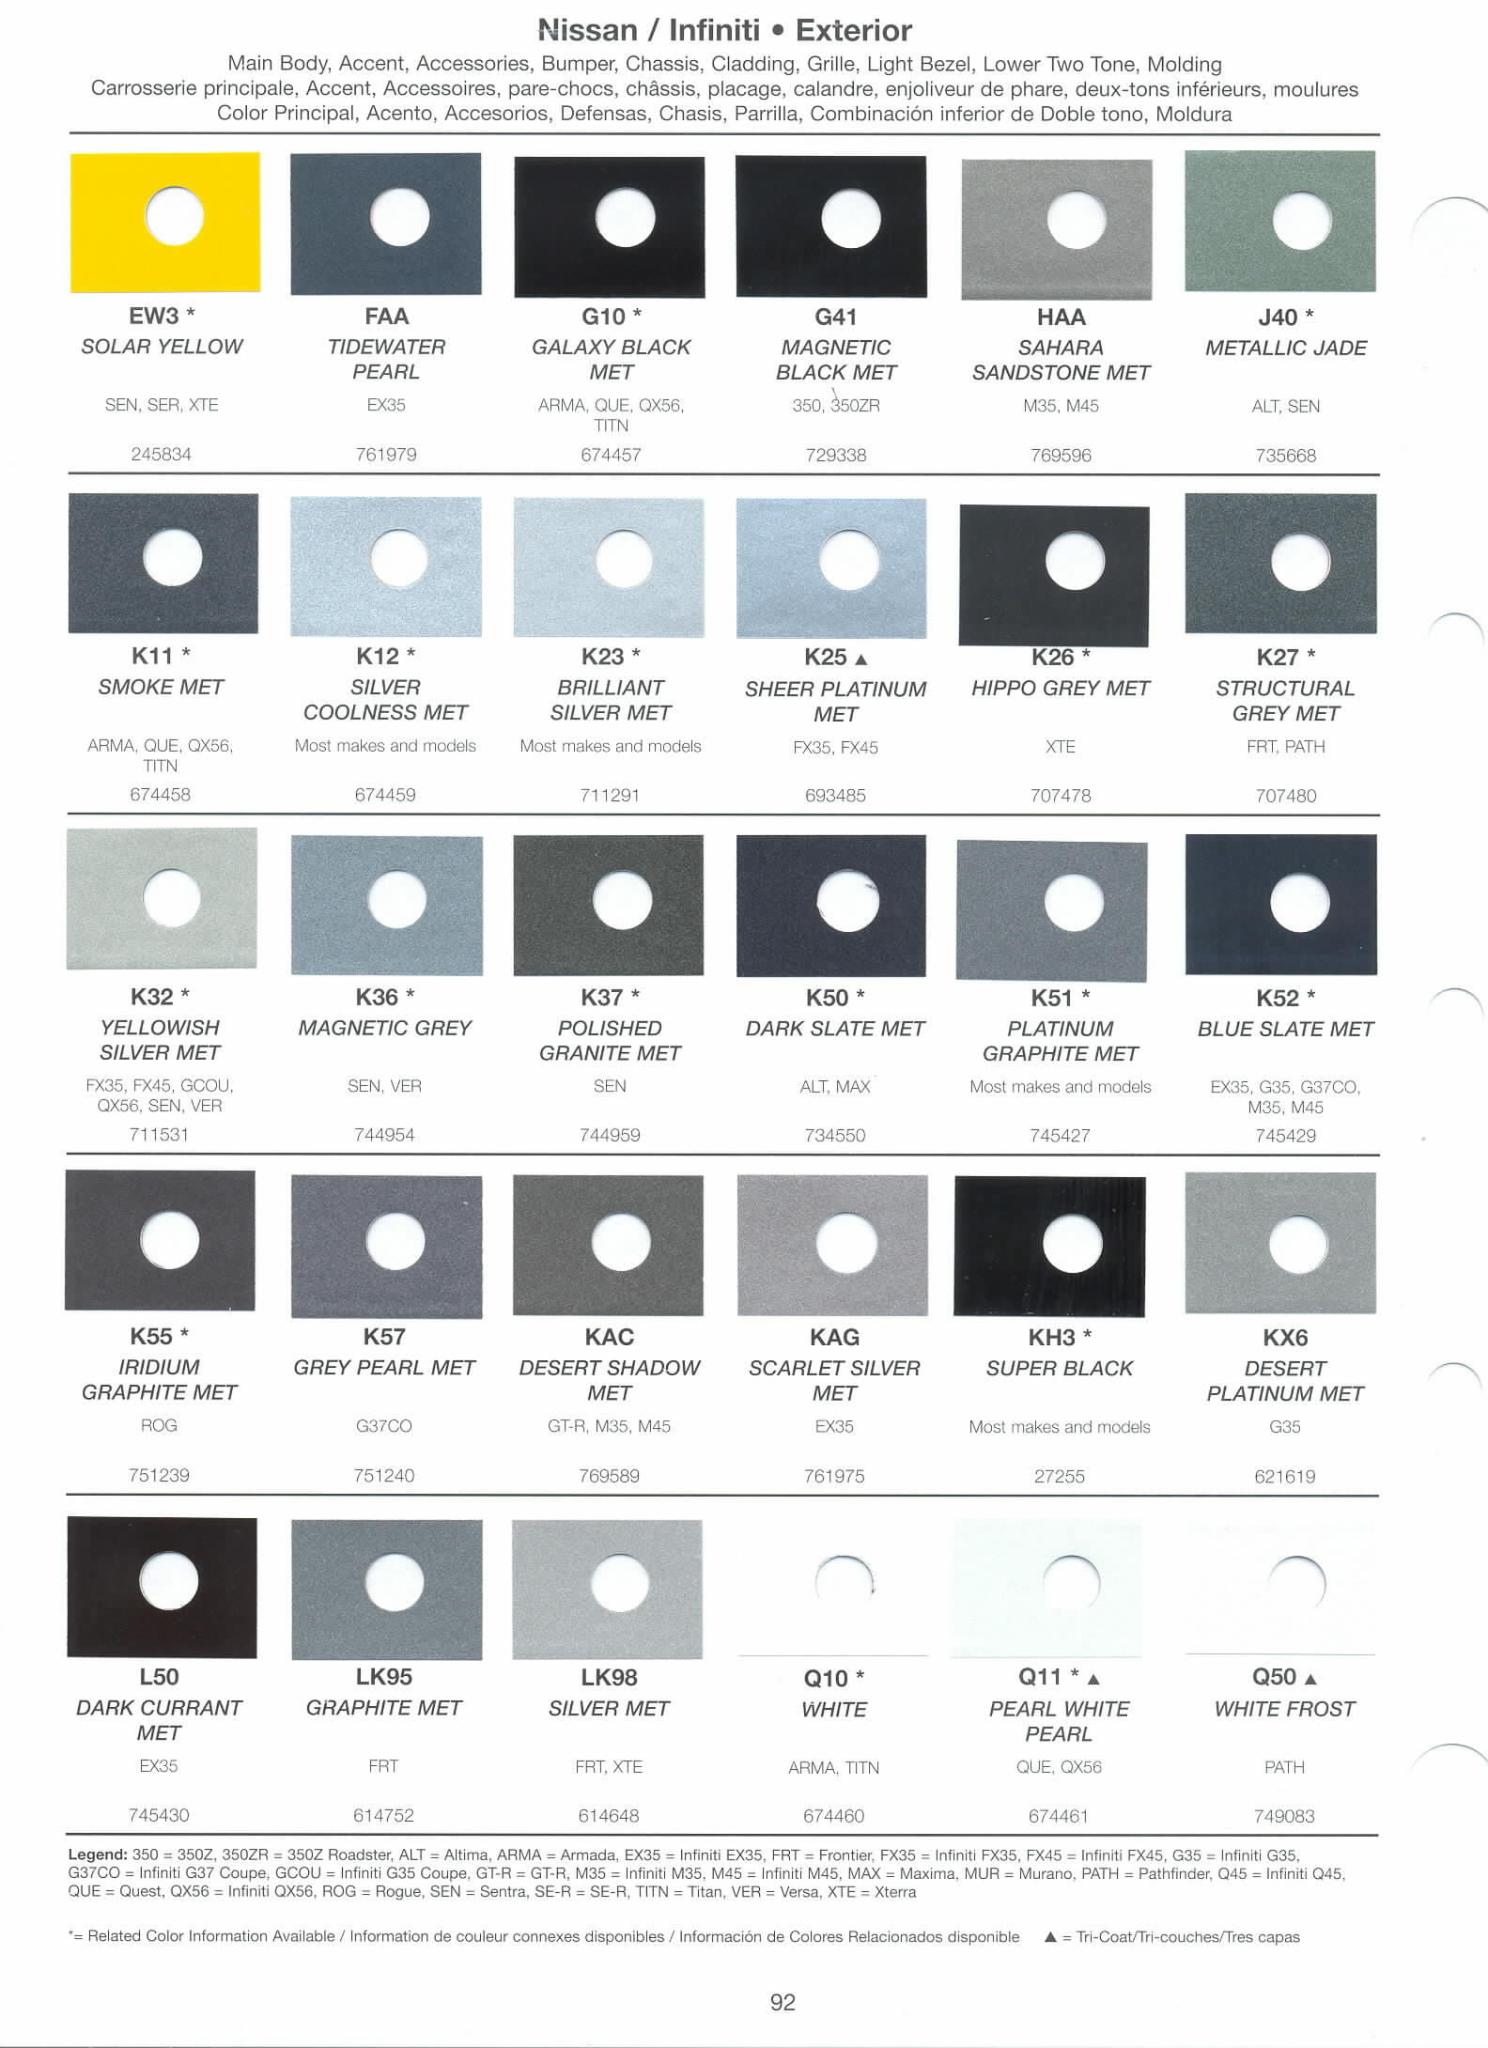 2008 Nissan and Infinity Exterior Color Code and Paint Swatch Chart